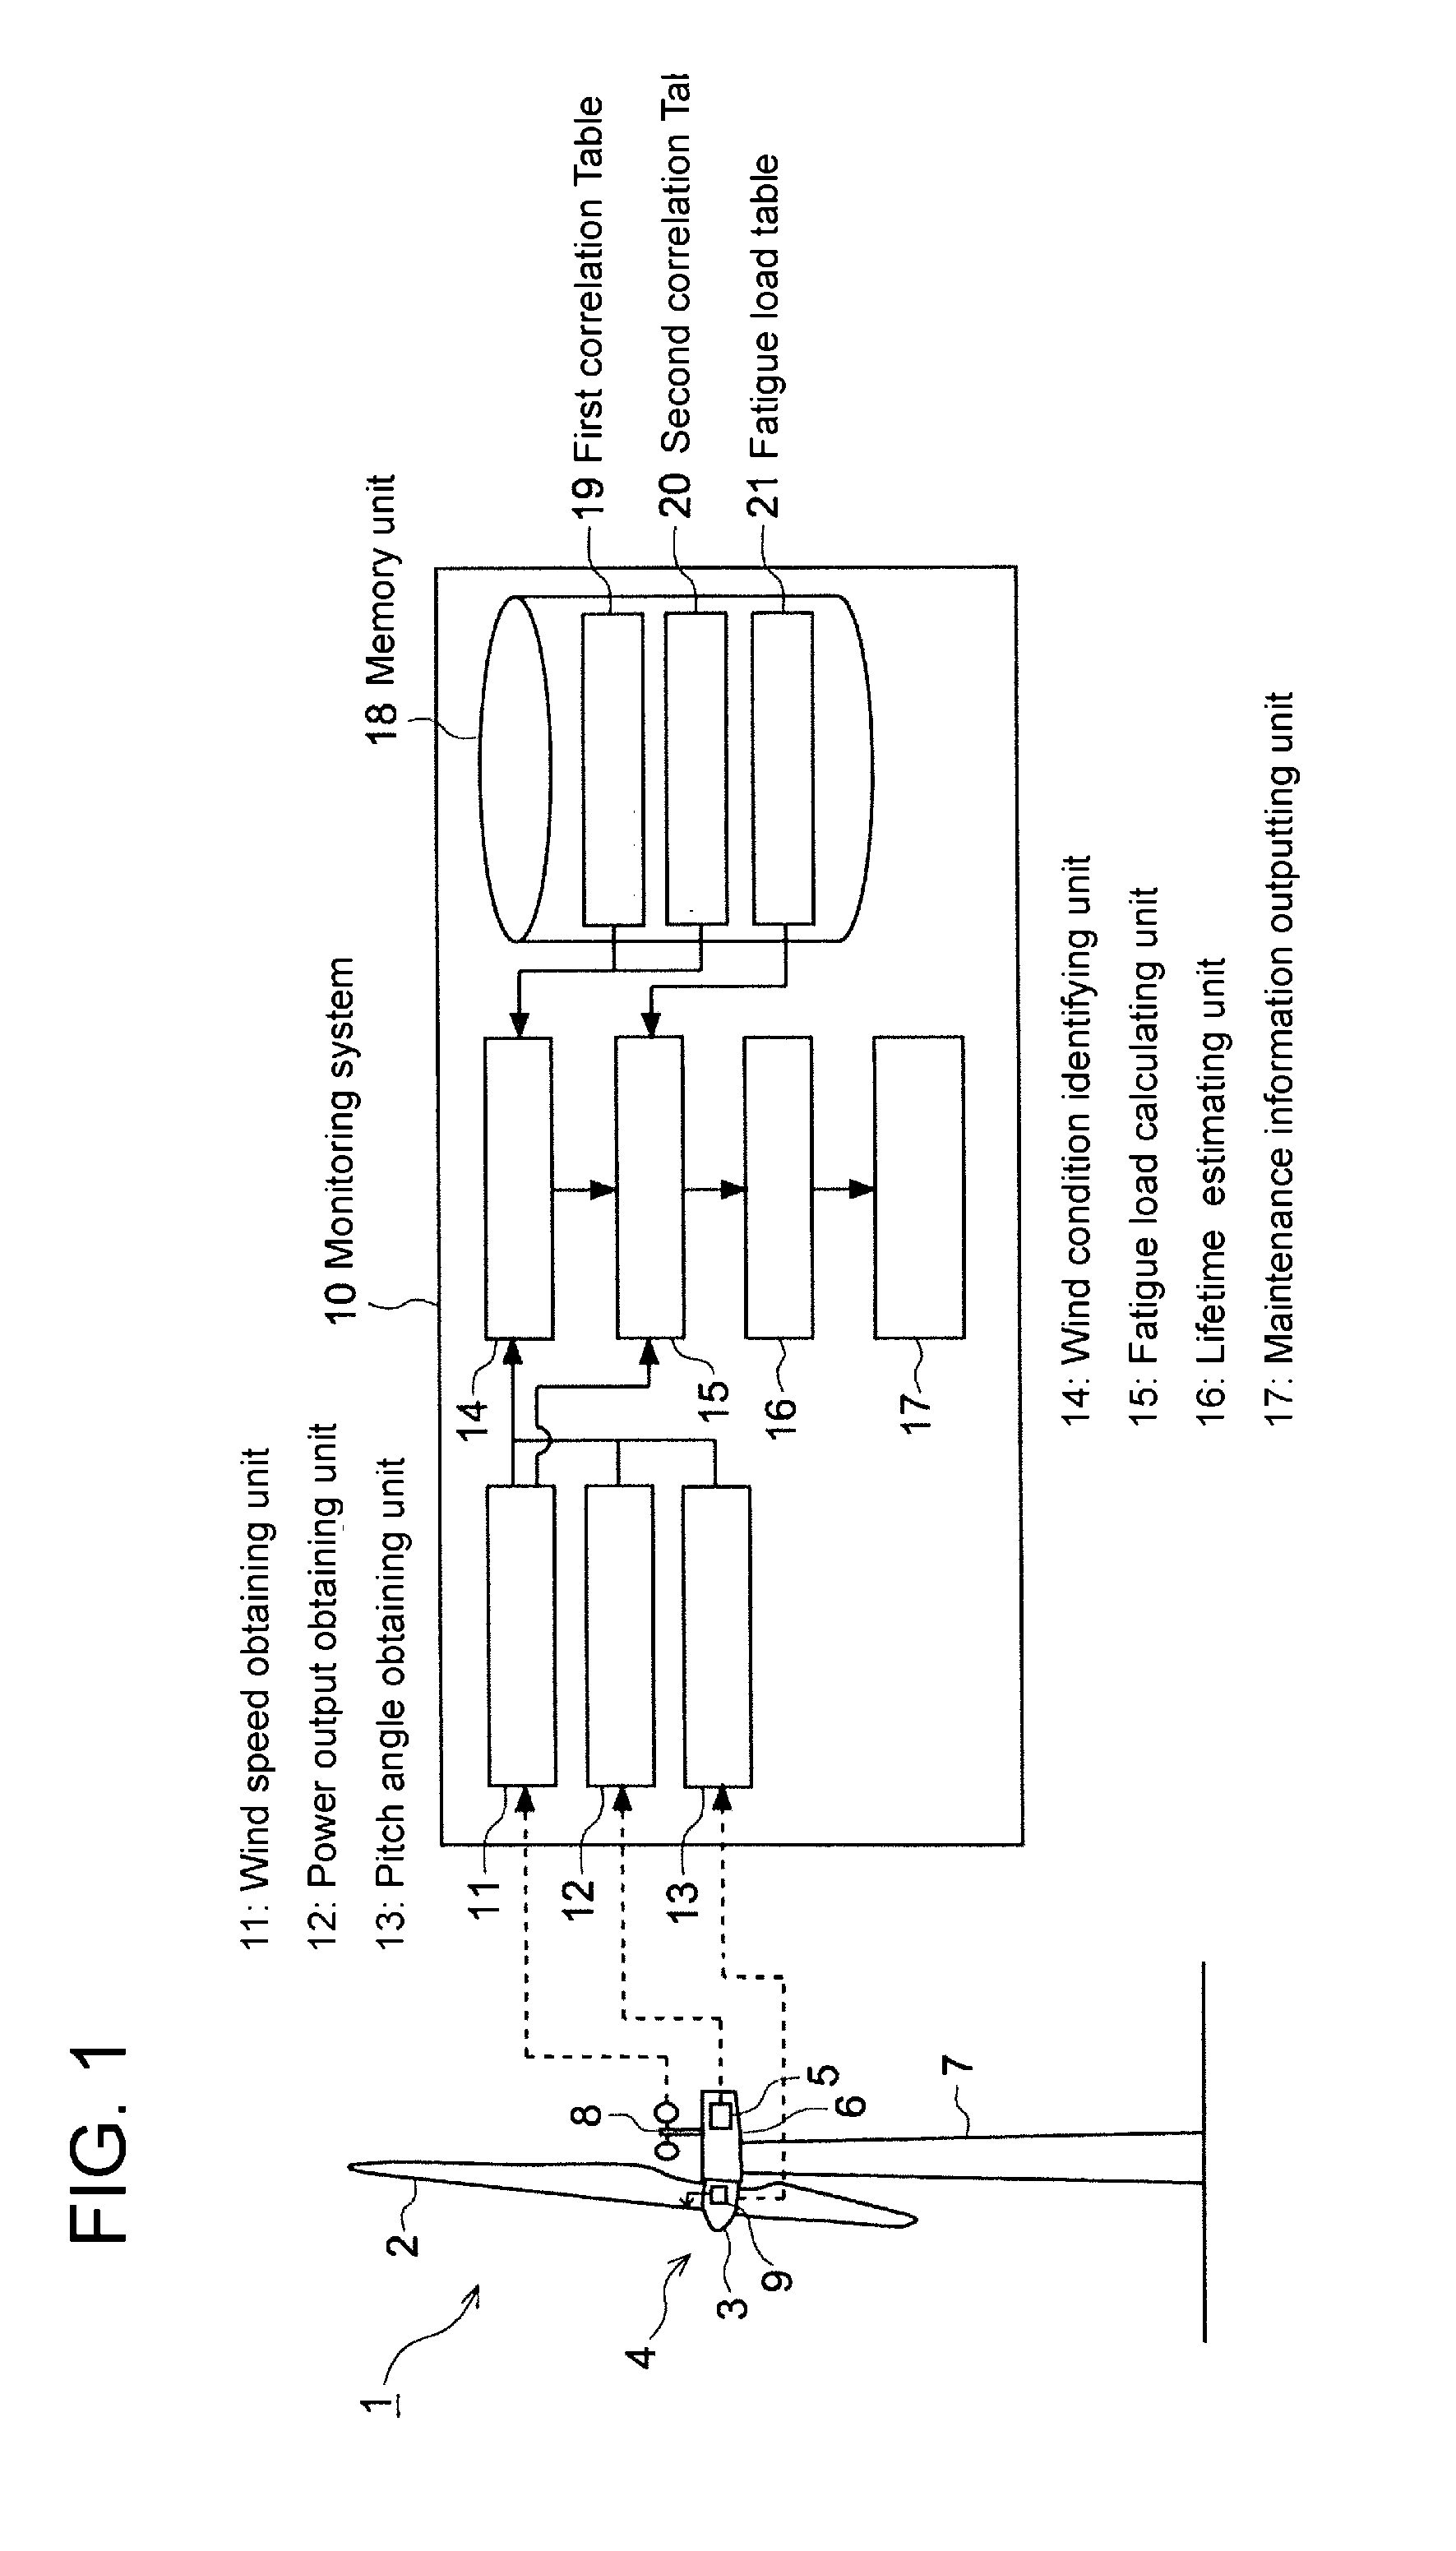 Monitoring system and a monitoring method for a wind turbine generator